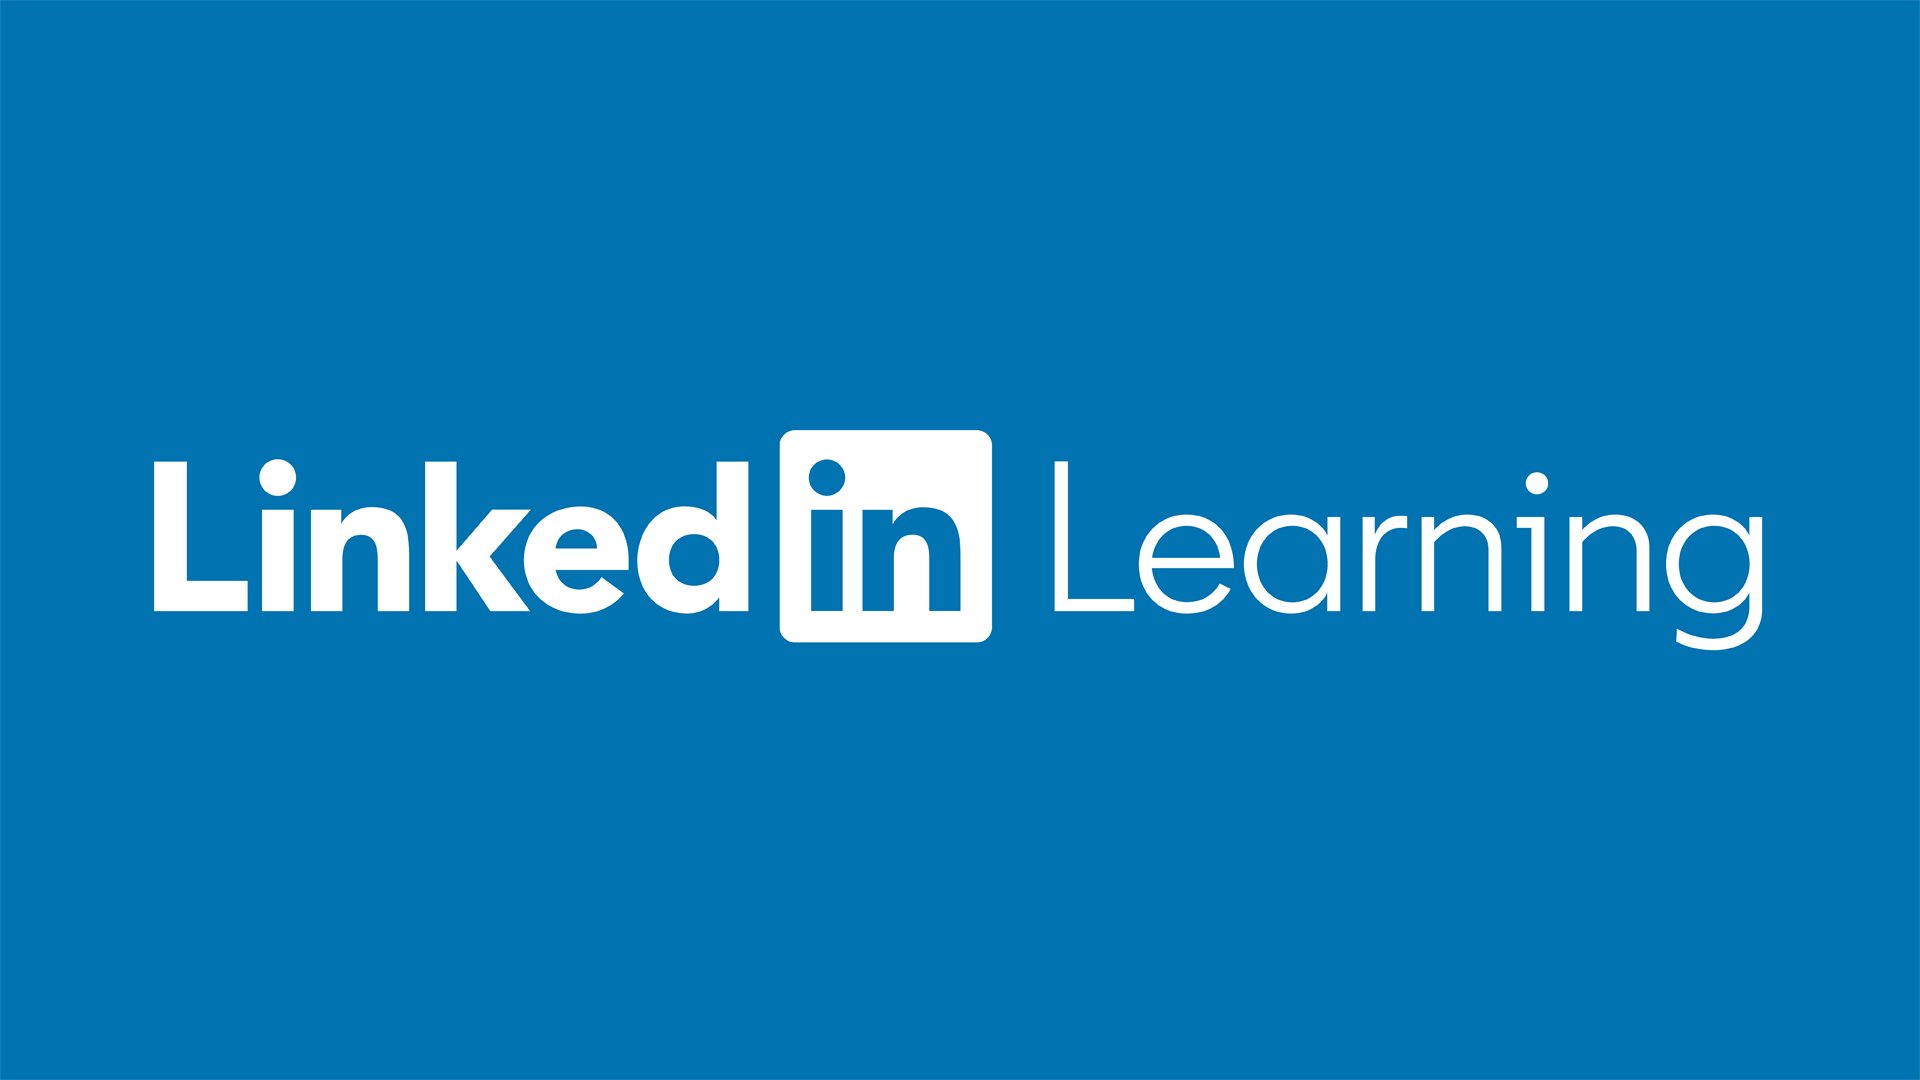 sky blue background with white letters that say LinkedIn Learning